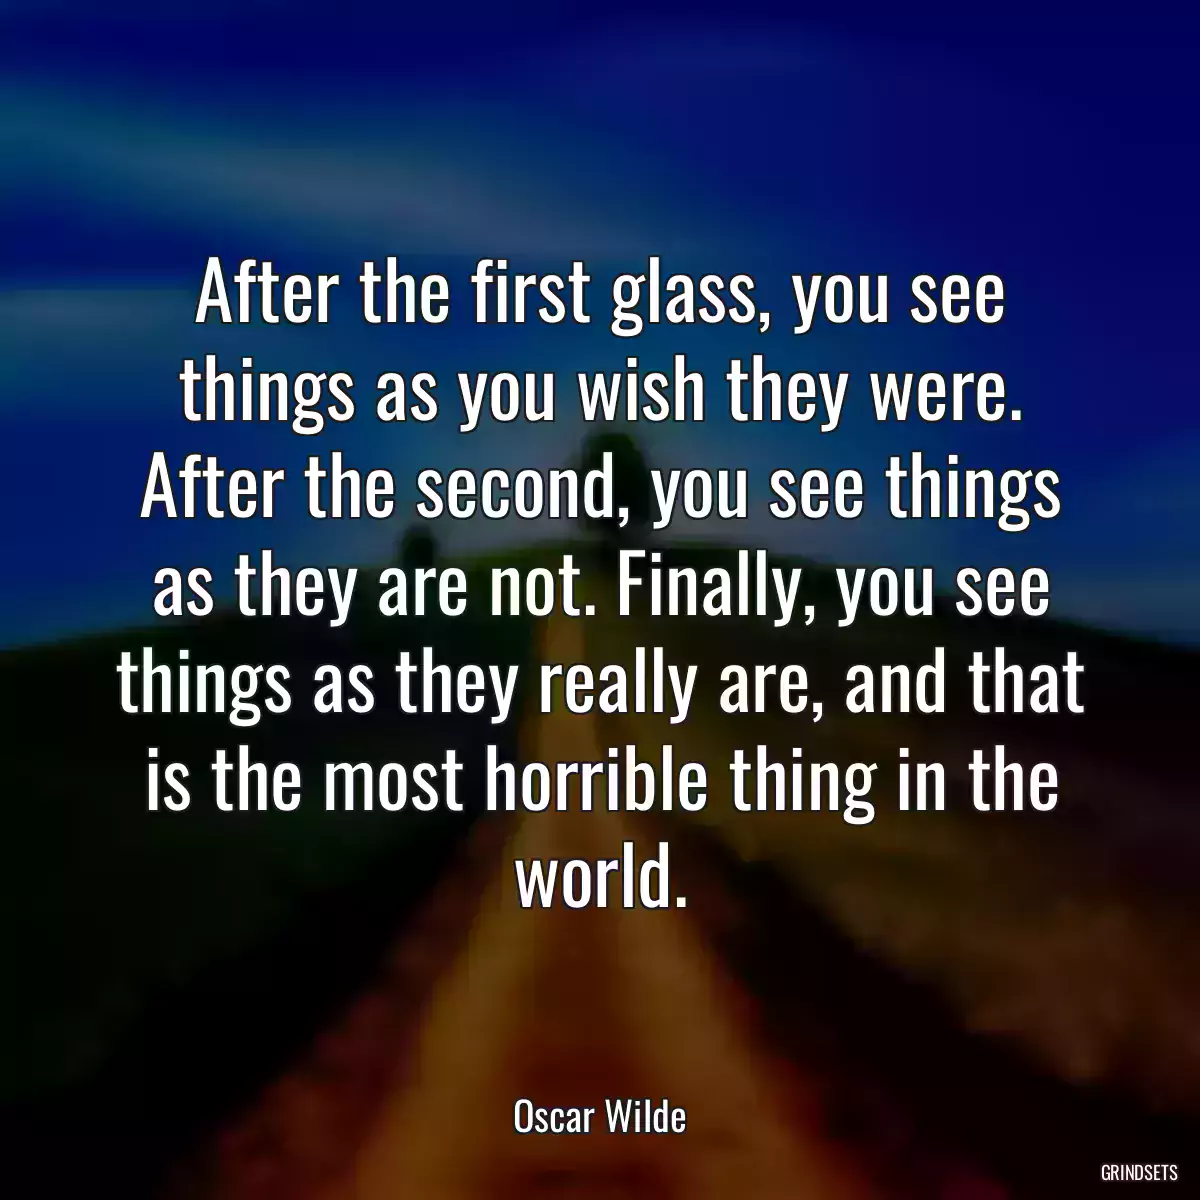 After the first glass, you see things as you wish they were. After the second, you see things as they are not. Finally, you see things as they really are, and that is the most horrible thing in the world.